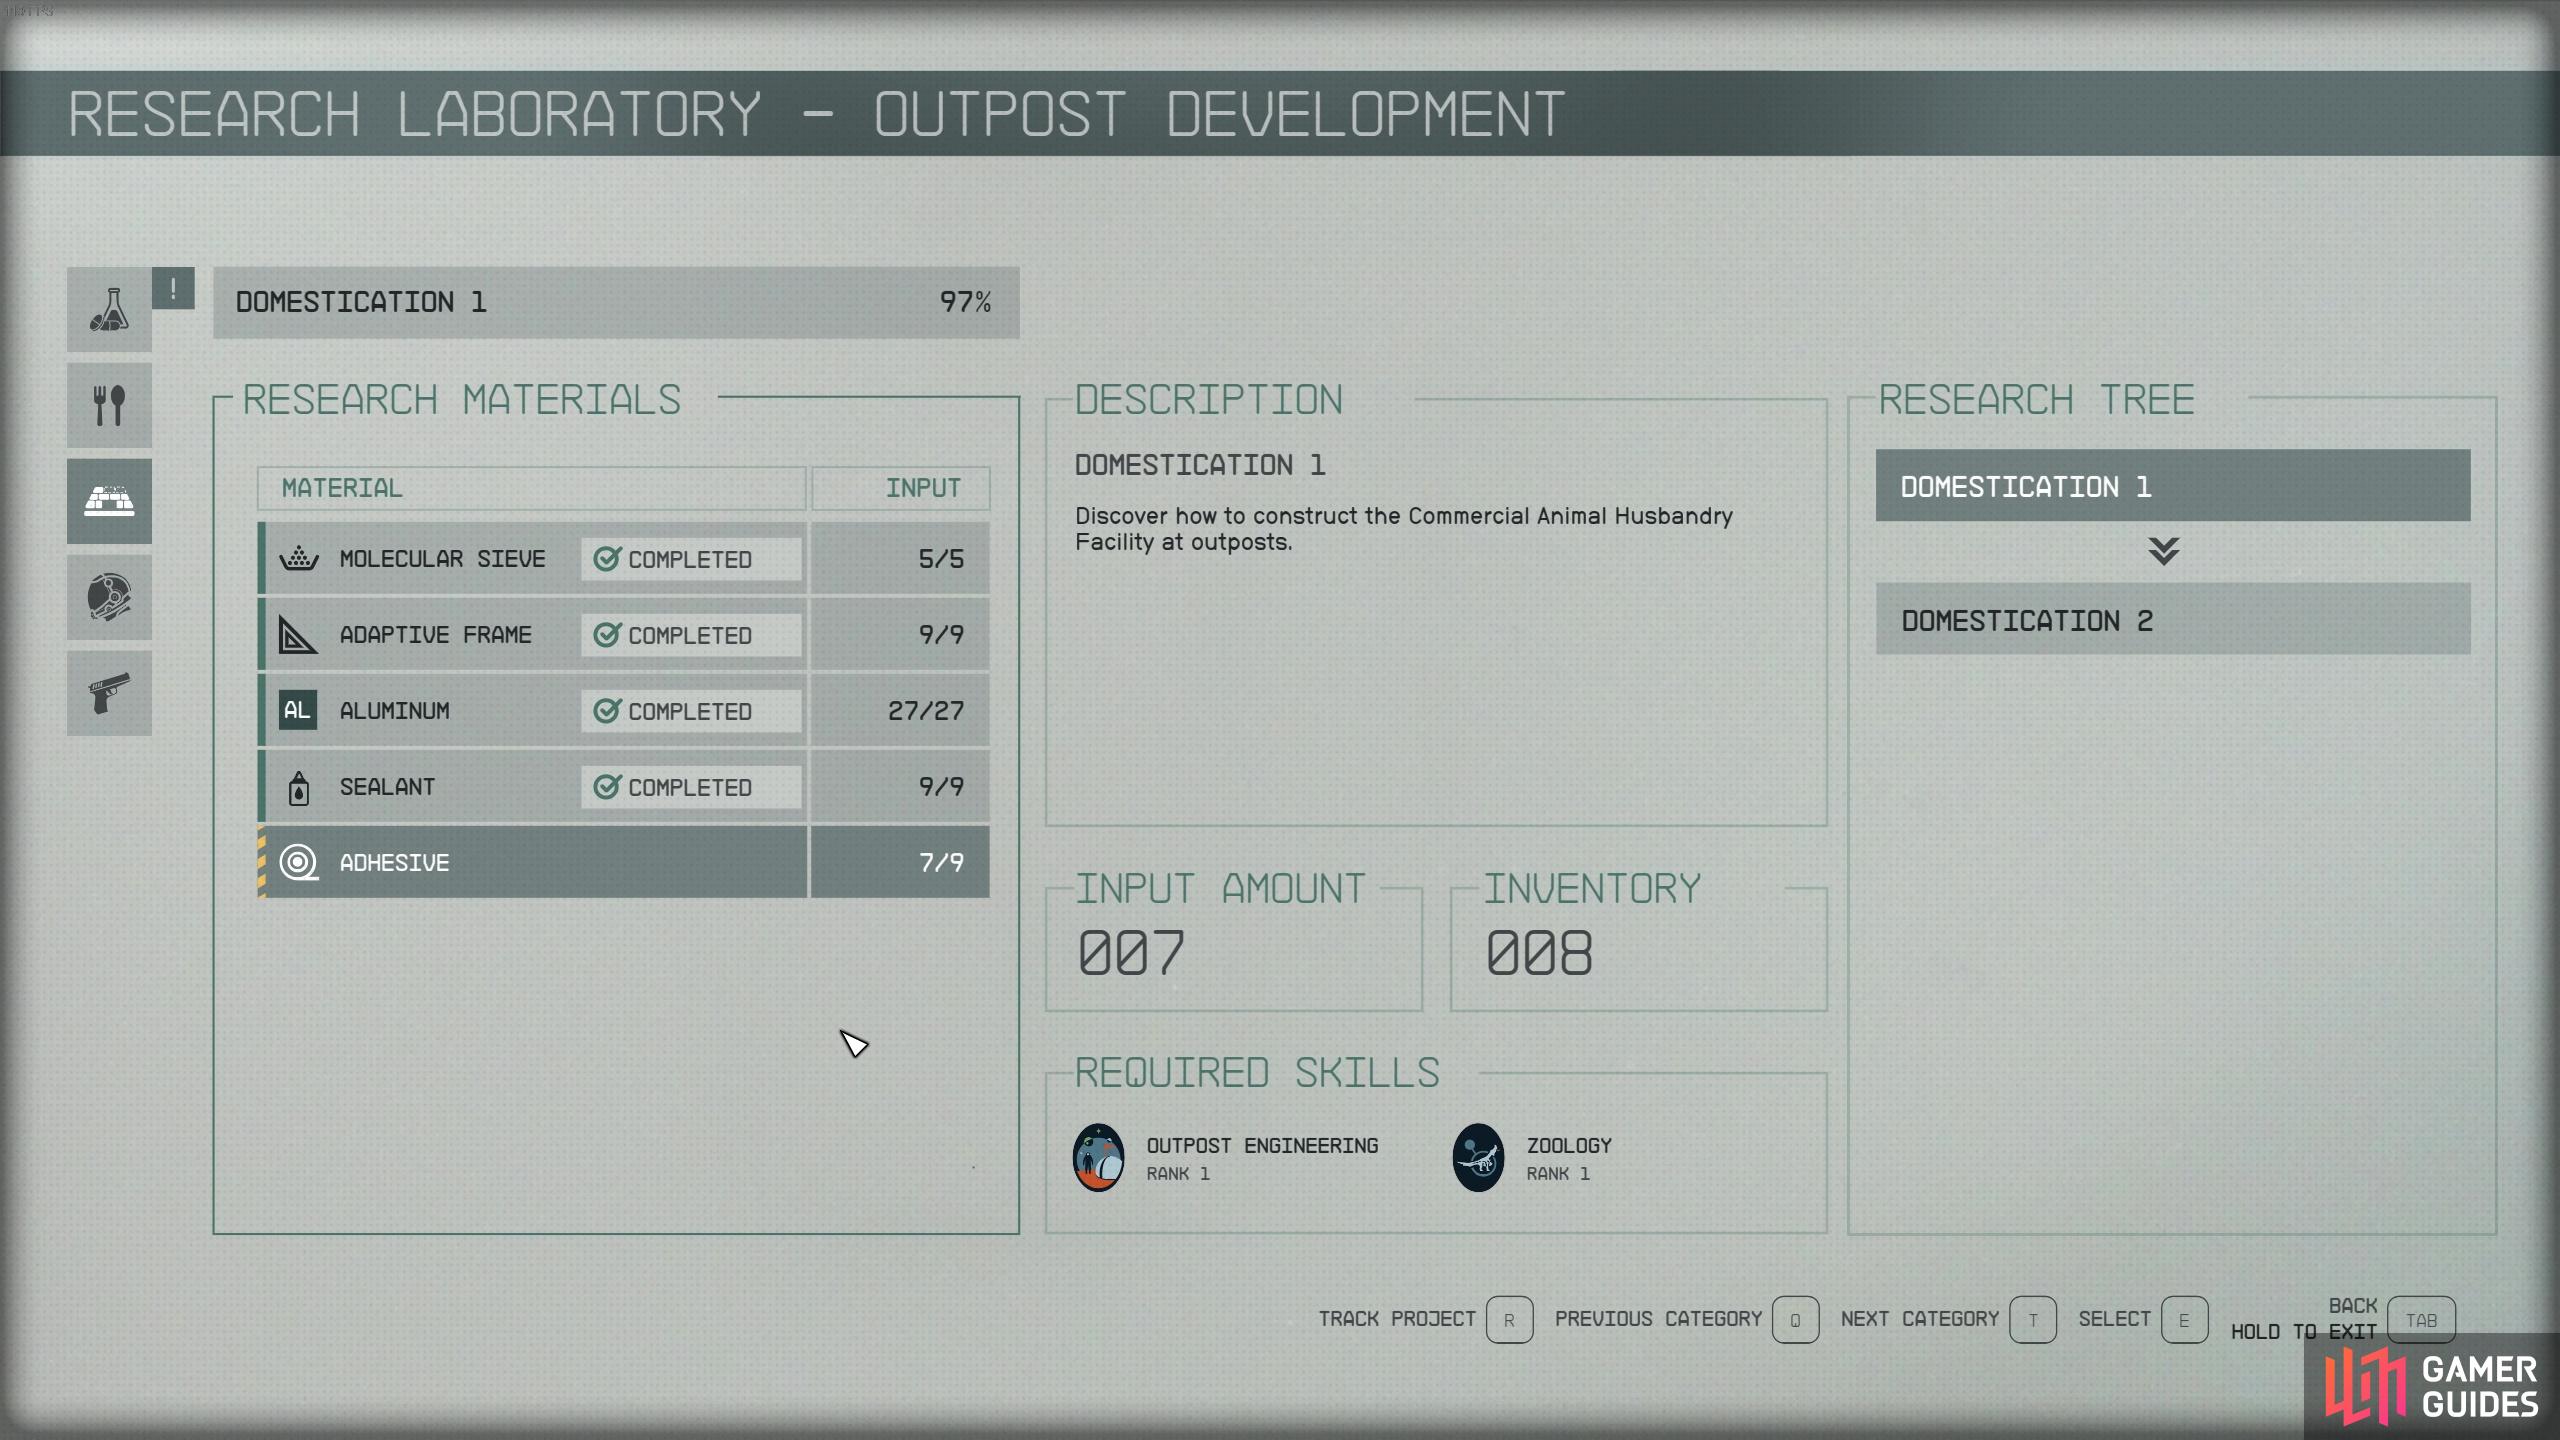 Domestication 1 can be researched once you have a skill in Outpost Engineering and Zoology. 